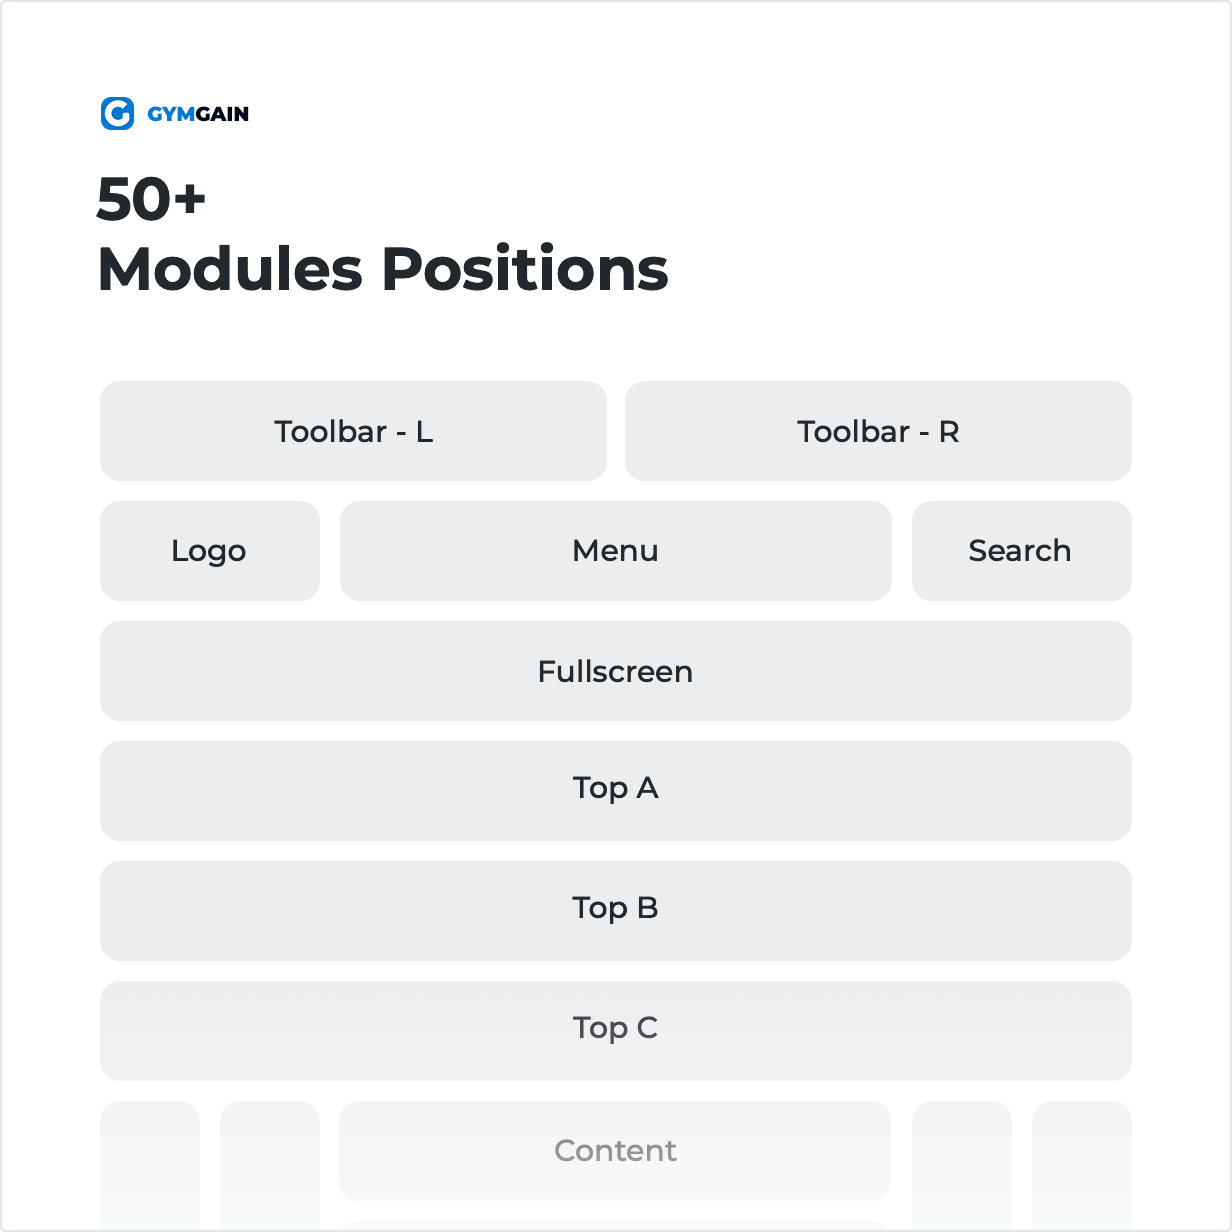 50+ Modules Positions